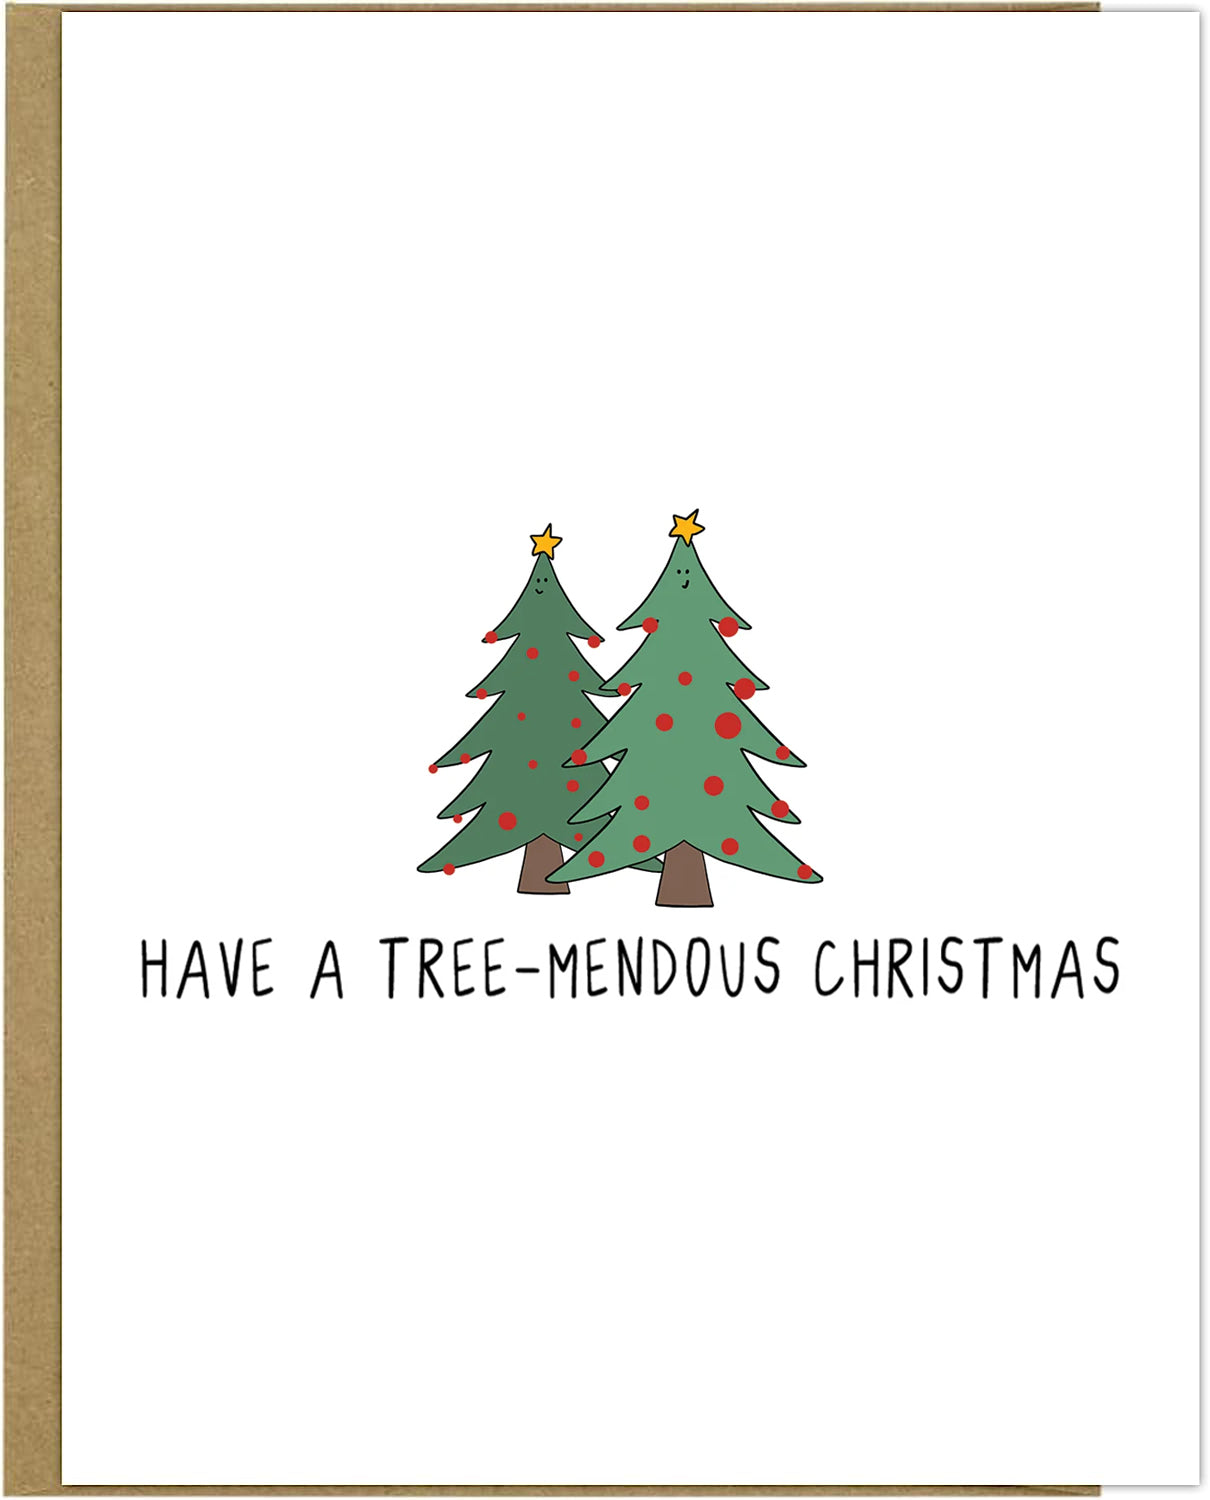 Have a rockdoodles Tree-Mendous Christmas Card.